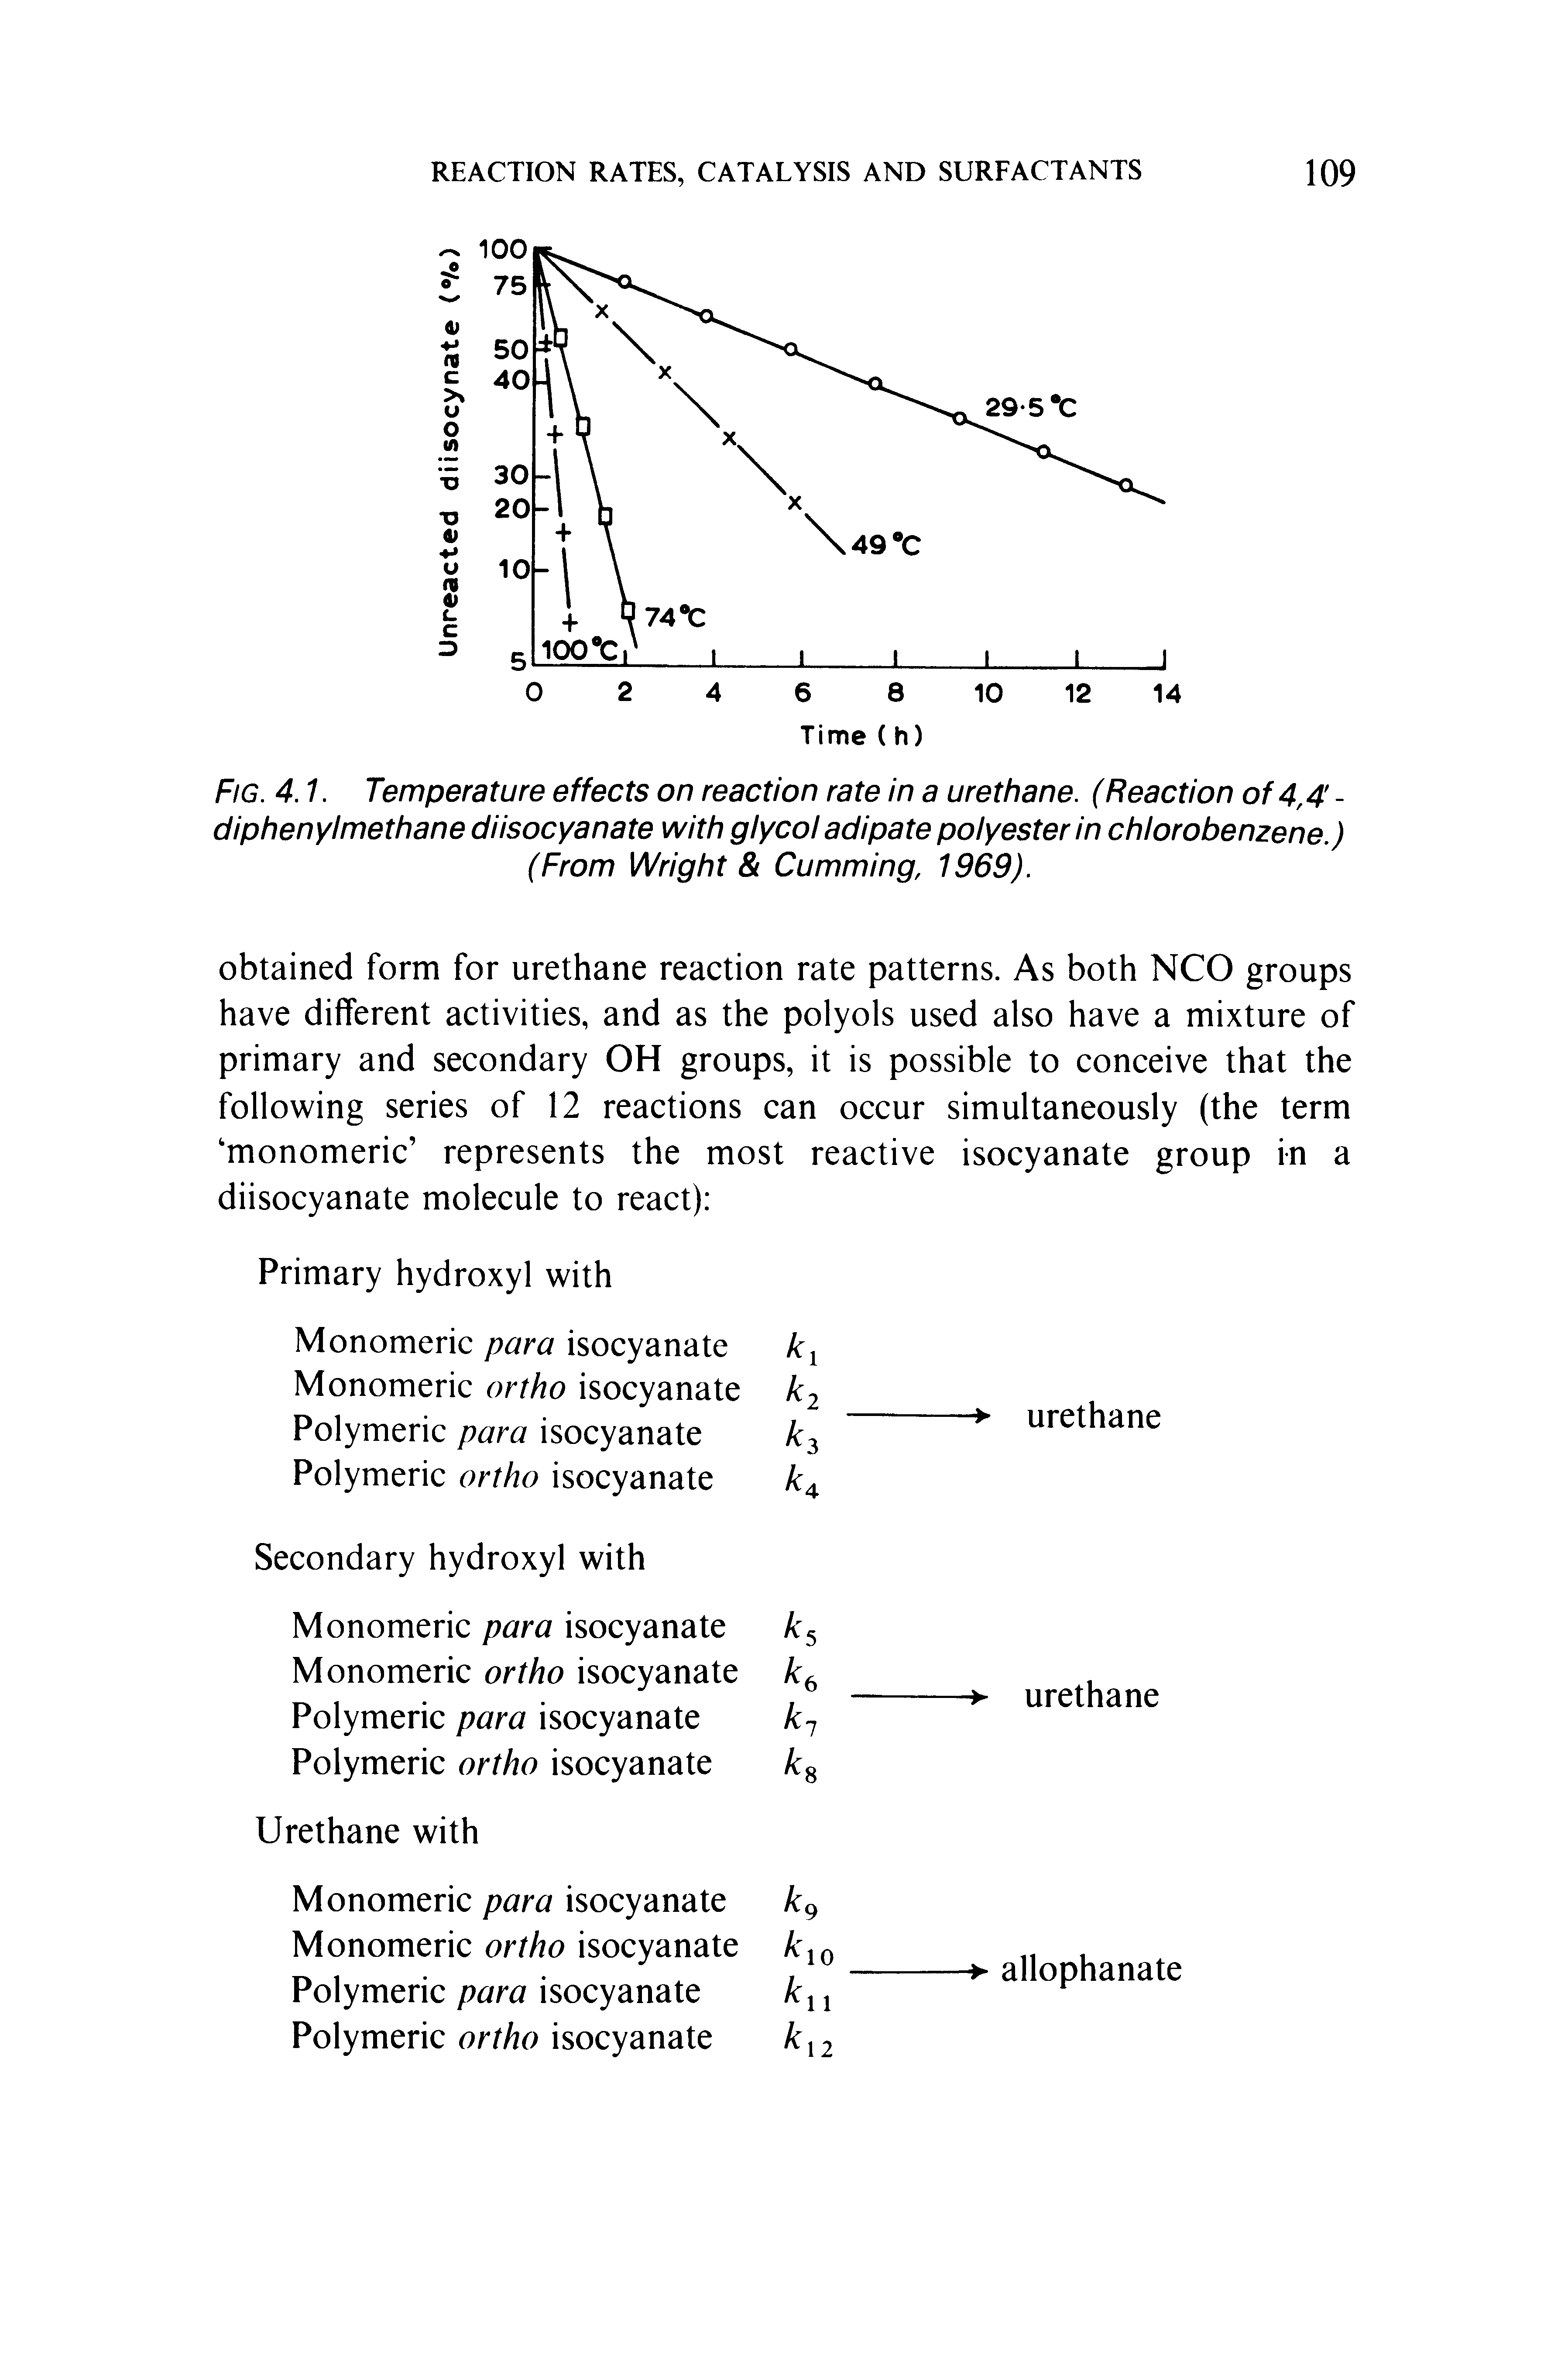 Fig. 4.1. Temperature effects on reaction rate in a urethane. (Reaction of 4,4 -diphenylmethane diisocyanate with glycol adipate polyester in chlorobenzene.) (From Wright Gumming, 1969).